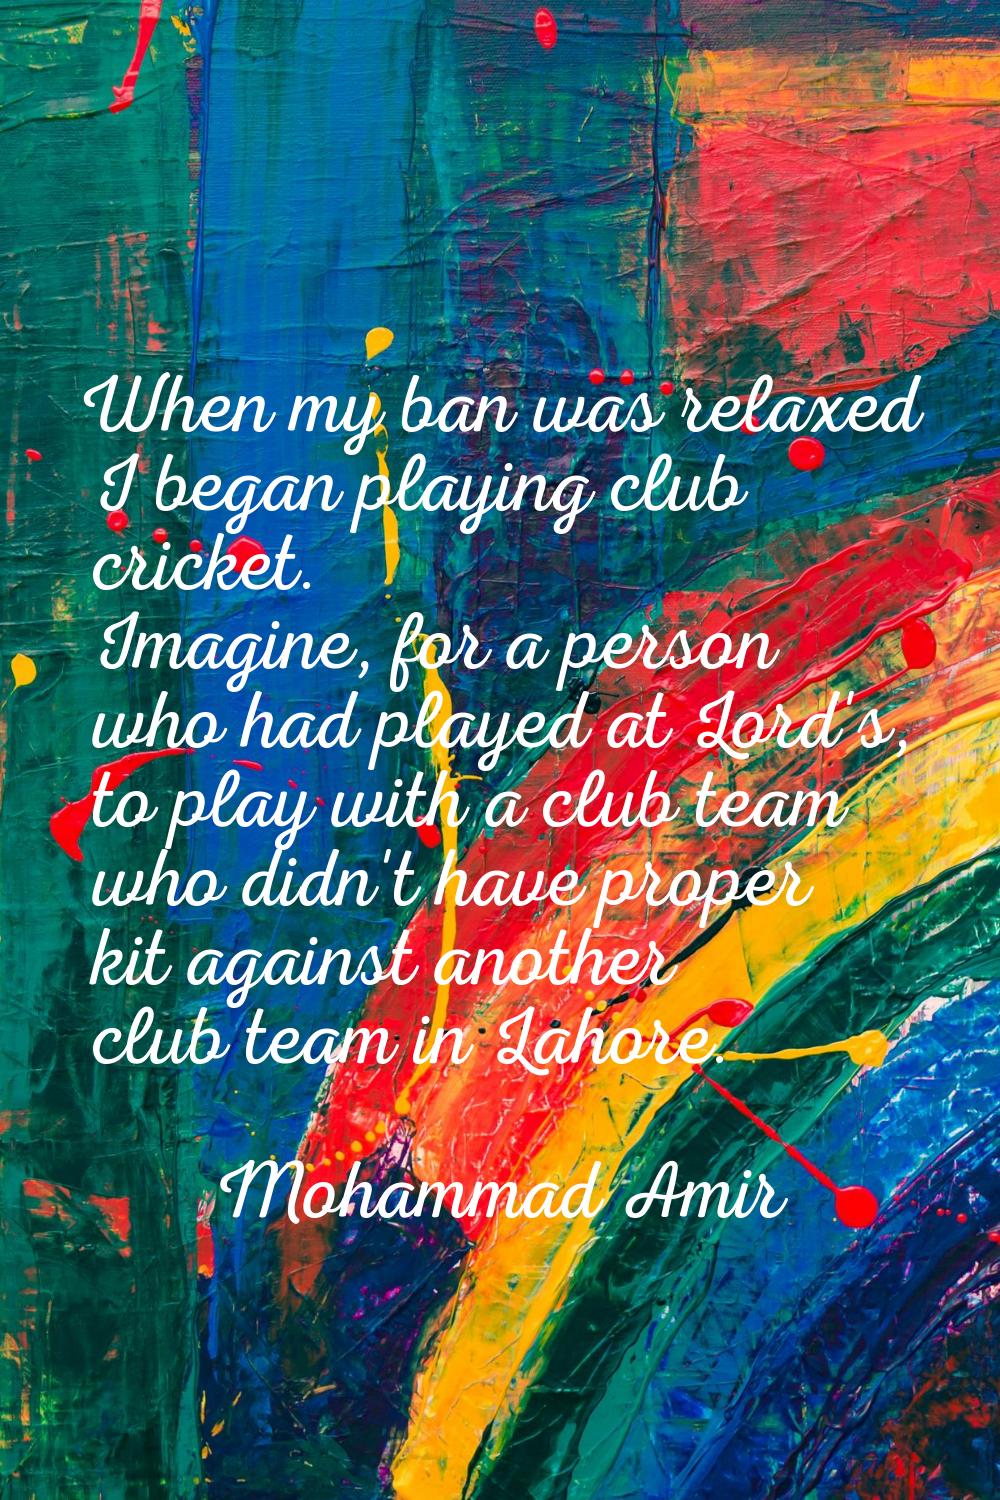 When my ban was relaxed I began playing club cricket. Imagine, for a person who had played at Lord'